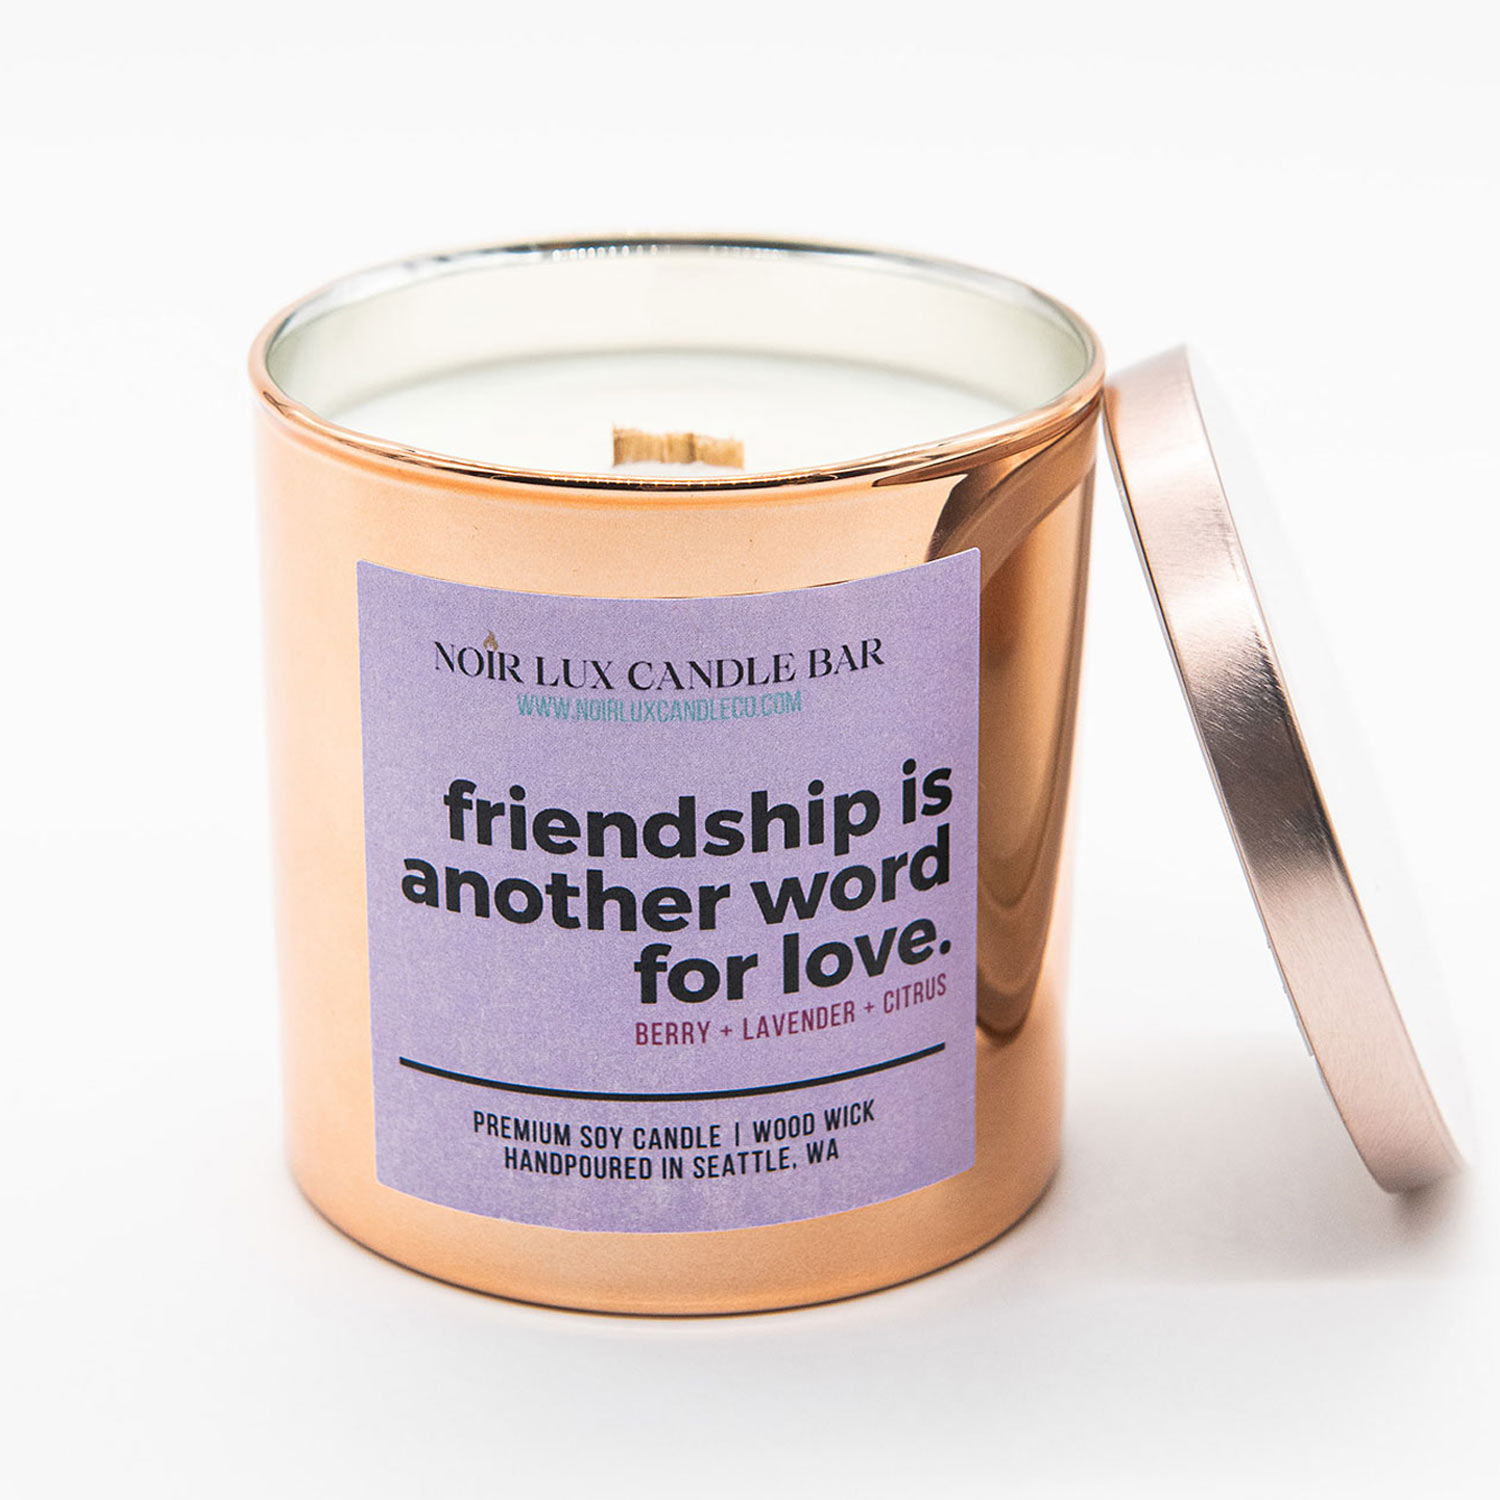 inspirational and quirky candles at Made in Washington